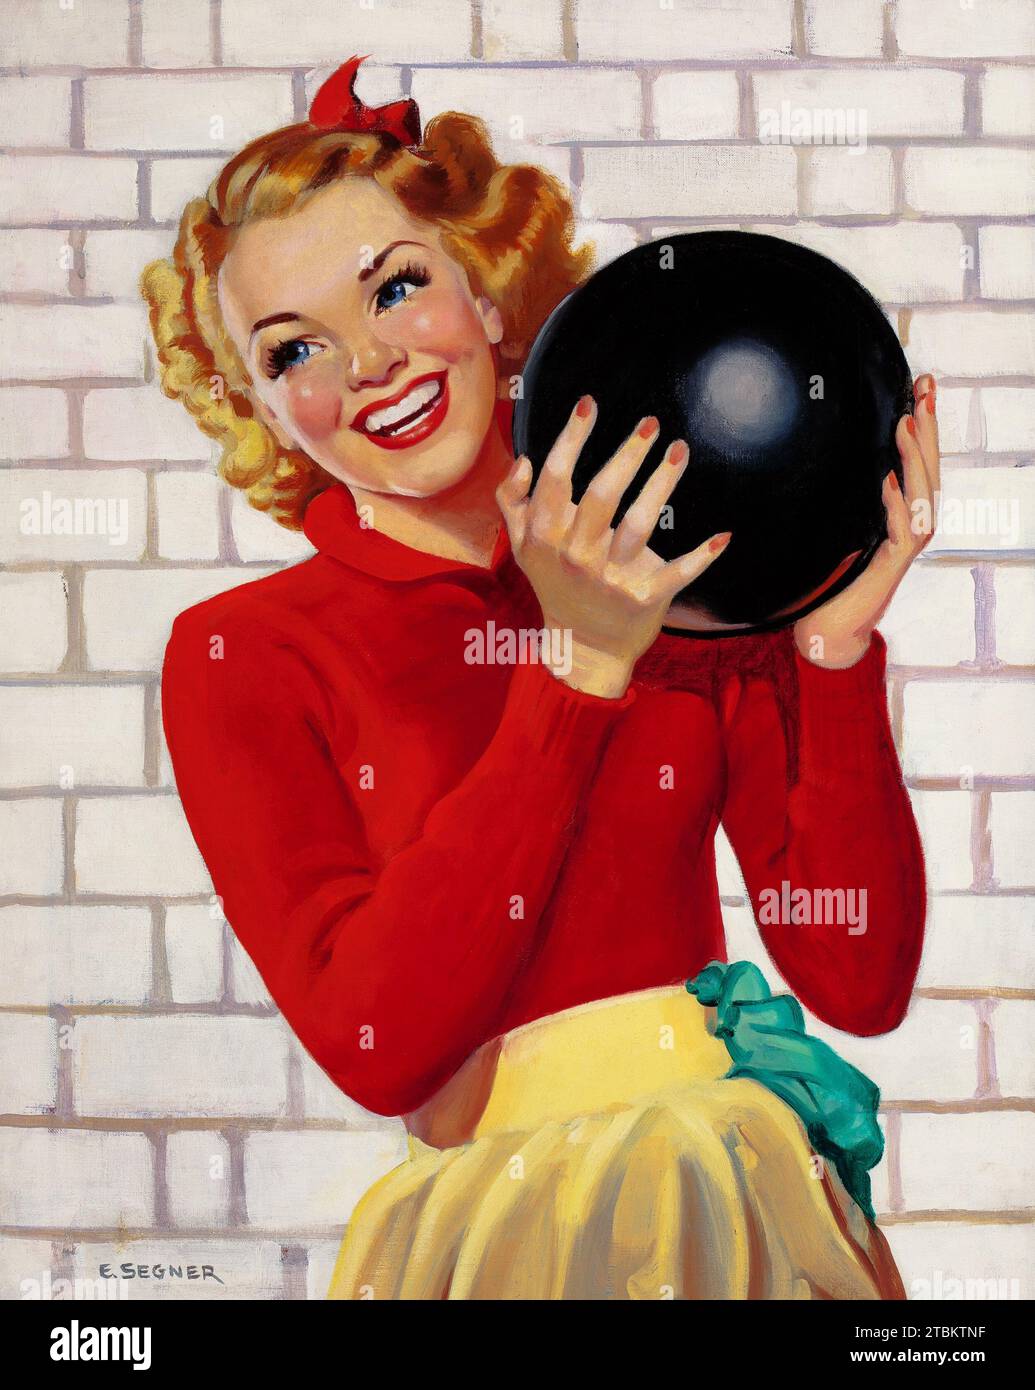 'Looking Pretty (while bowling).  Painted by Ellen Barbara Segner for a calendar. (American, 1901-2001)' Stock Photo